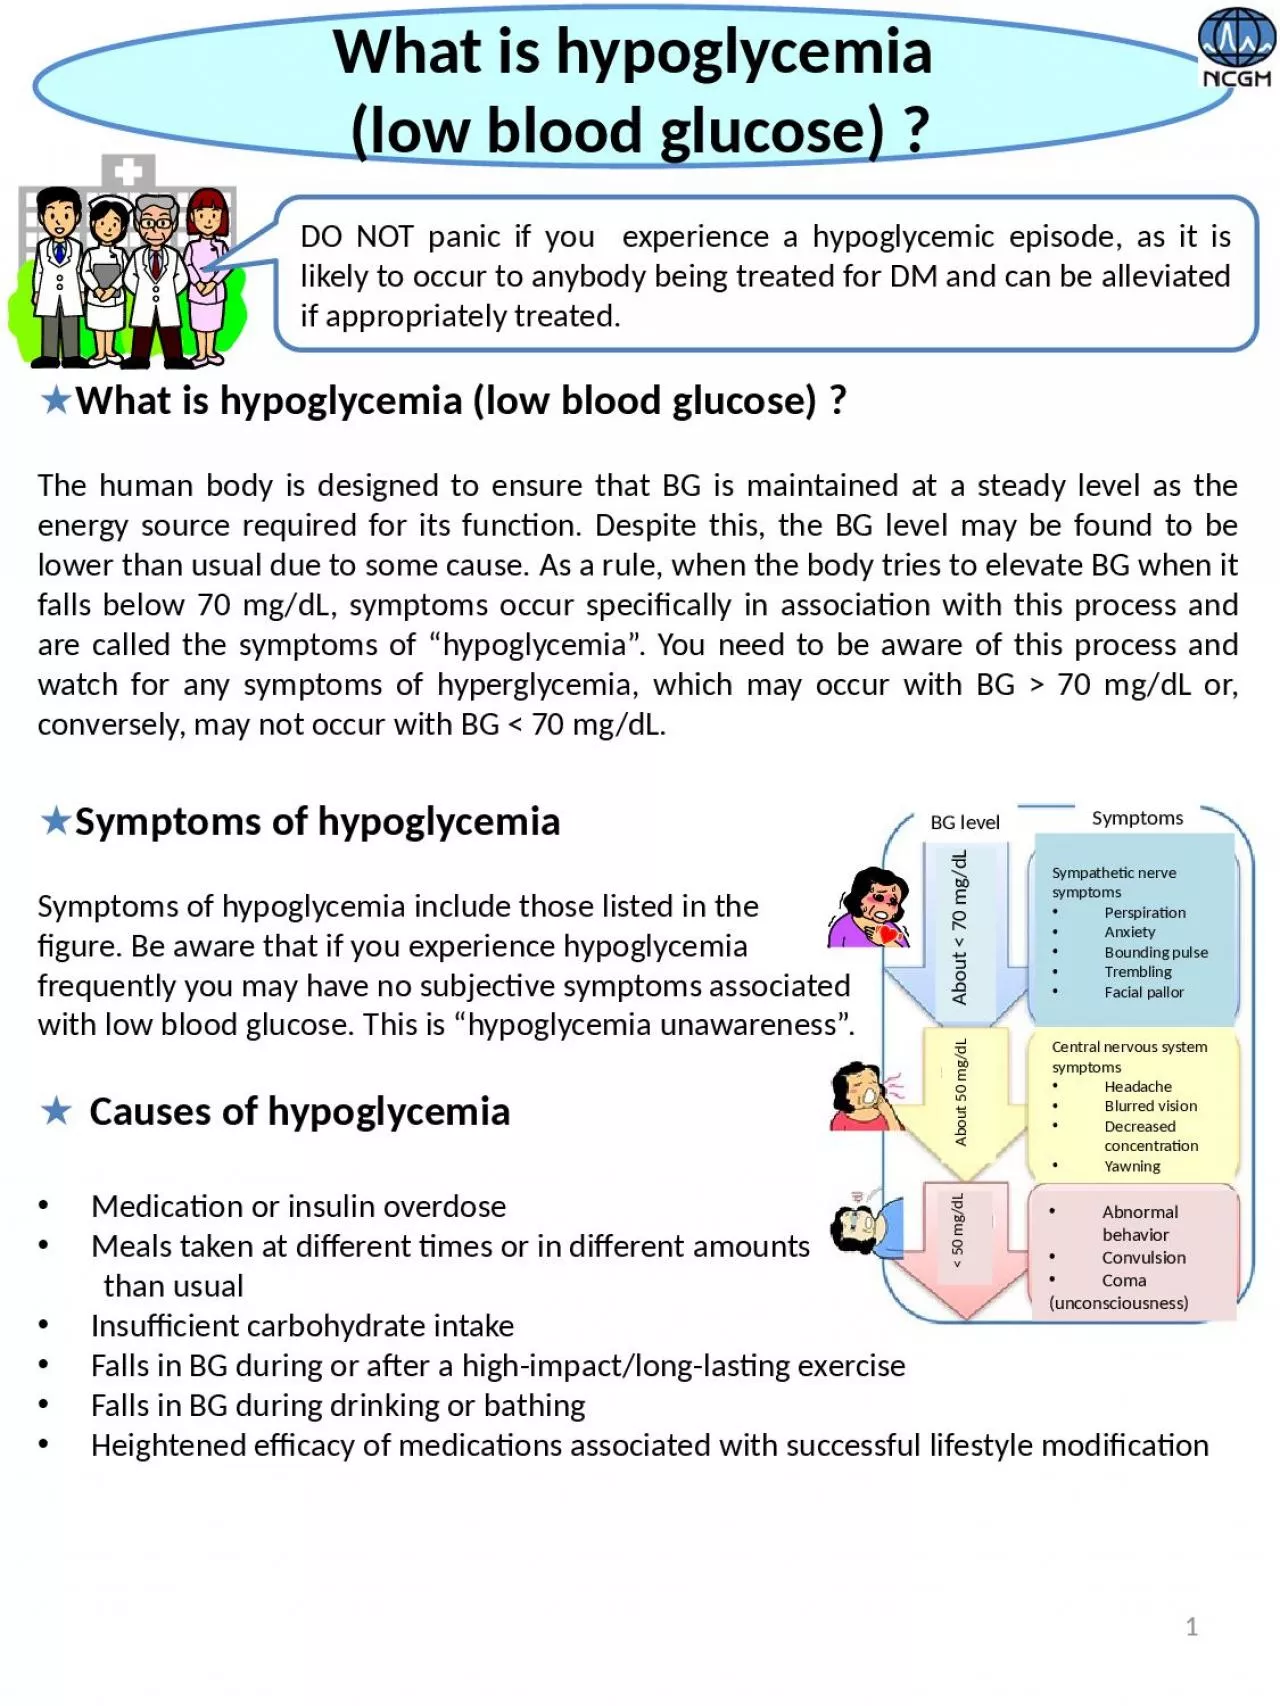 ★ What is hypoglycemia (low blood glucose) ?